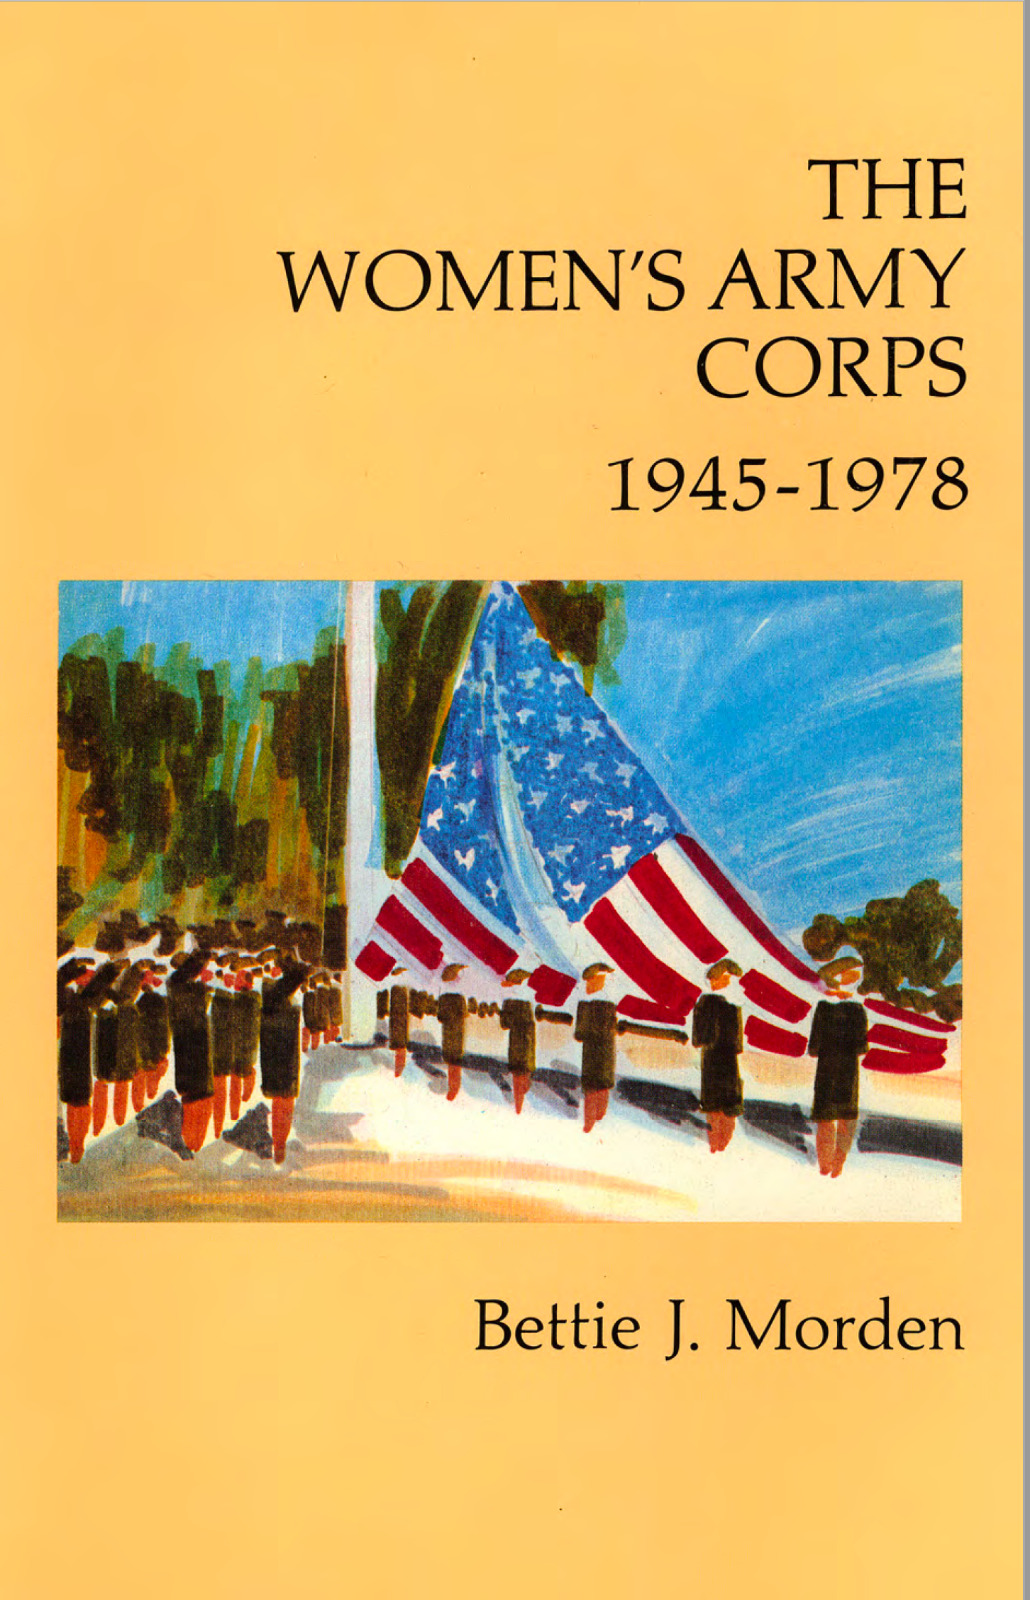 568 Page 1990 Pub 30-14 The Women\'s Army Corps WAC 1945-1978 Morden on Data CD